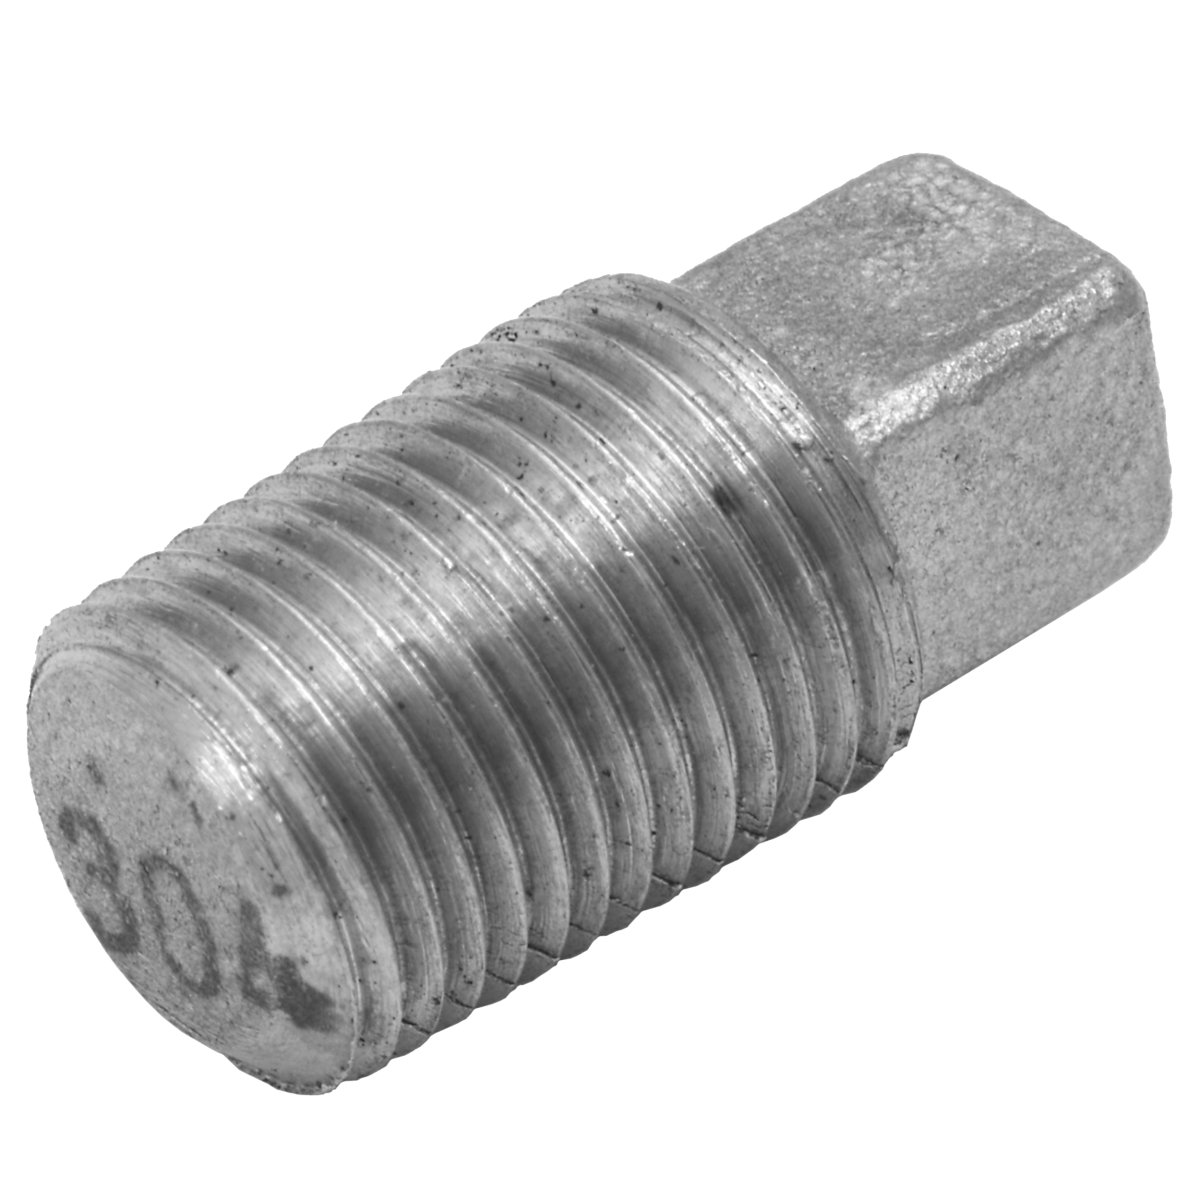 304 Stainless Steel Pipe Fitting 1/8" Square Head Plug